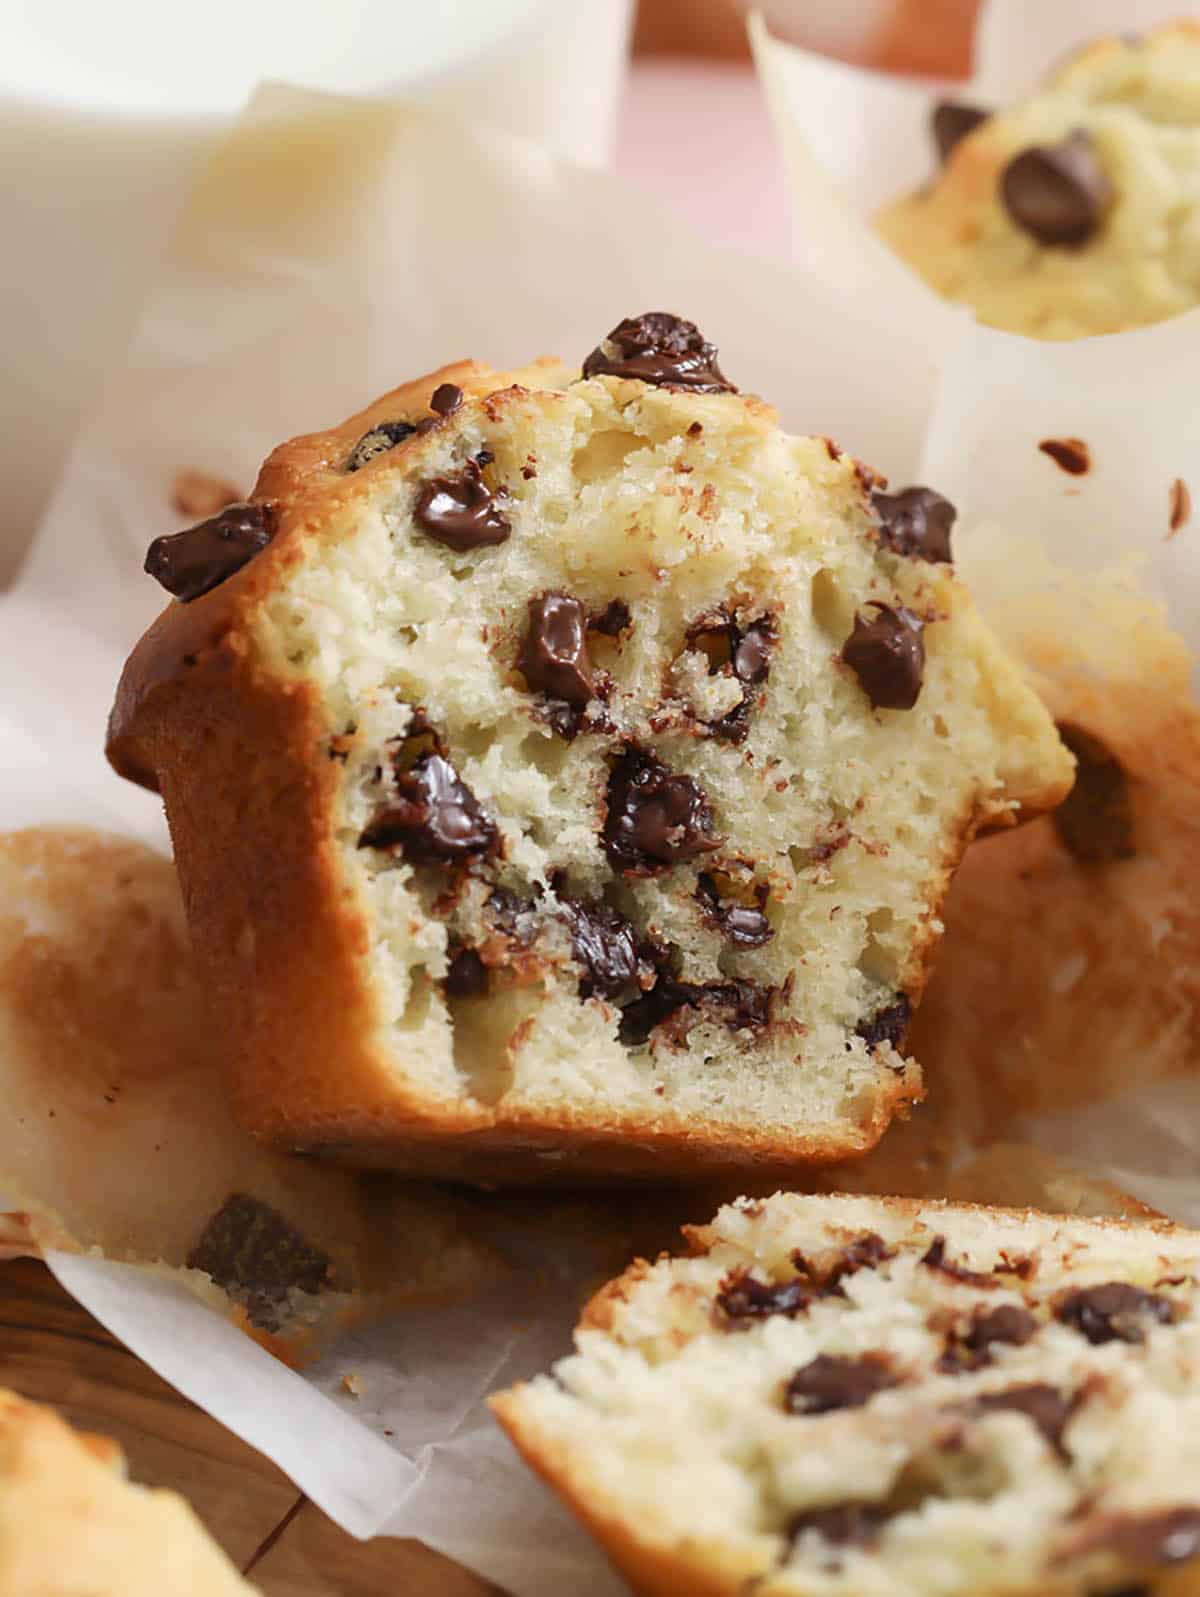 A chocolate chip muffin cut in half exposing many melted chocolate chips inside.